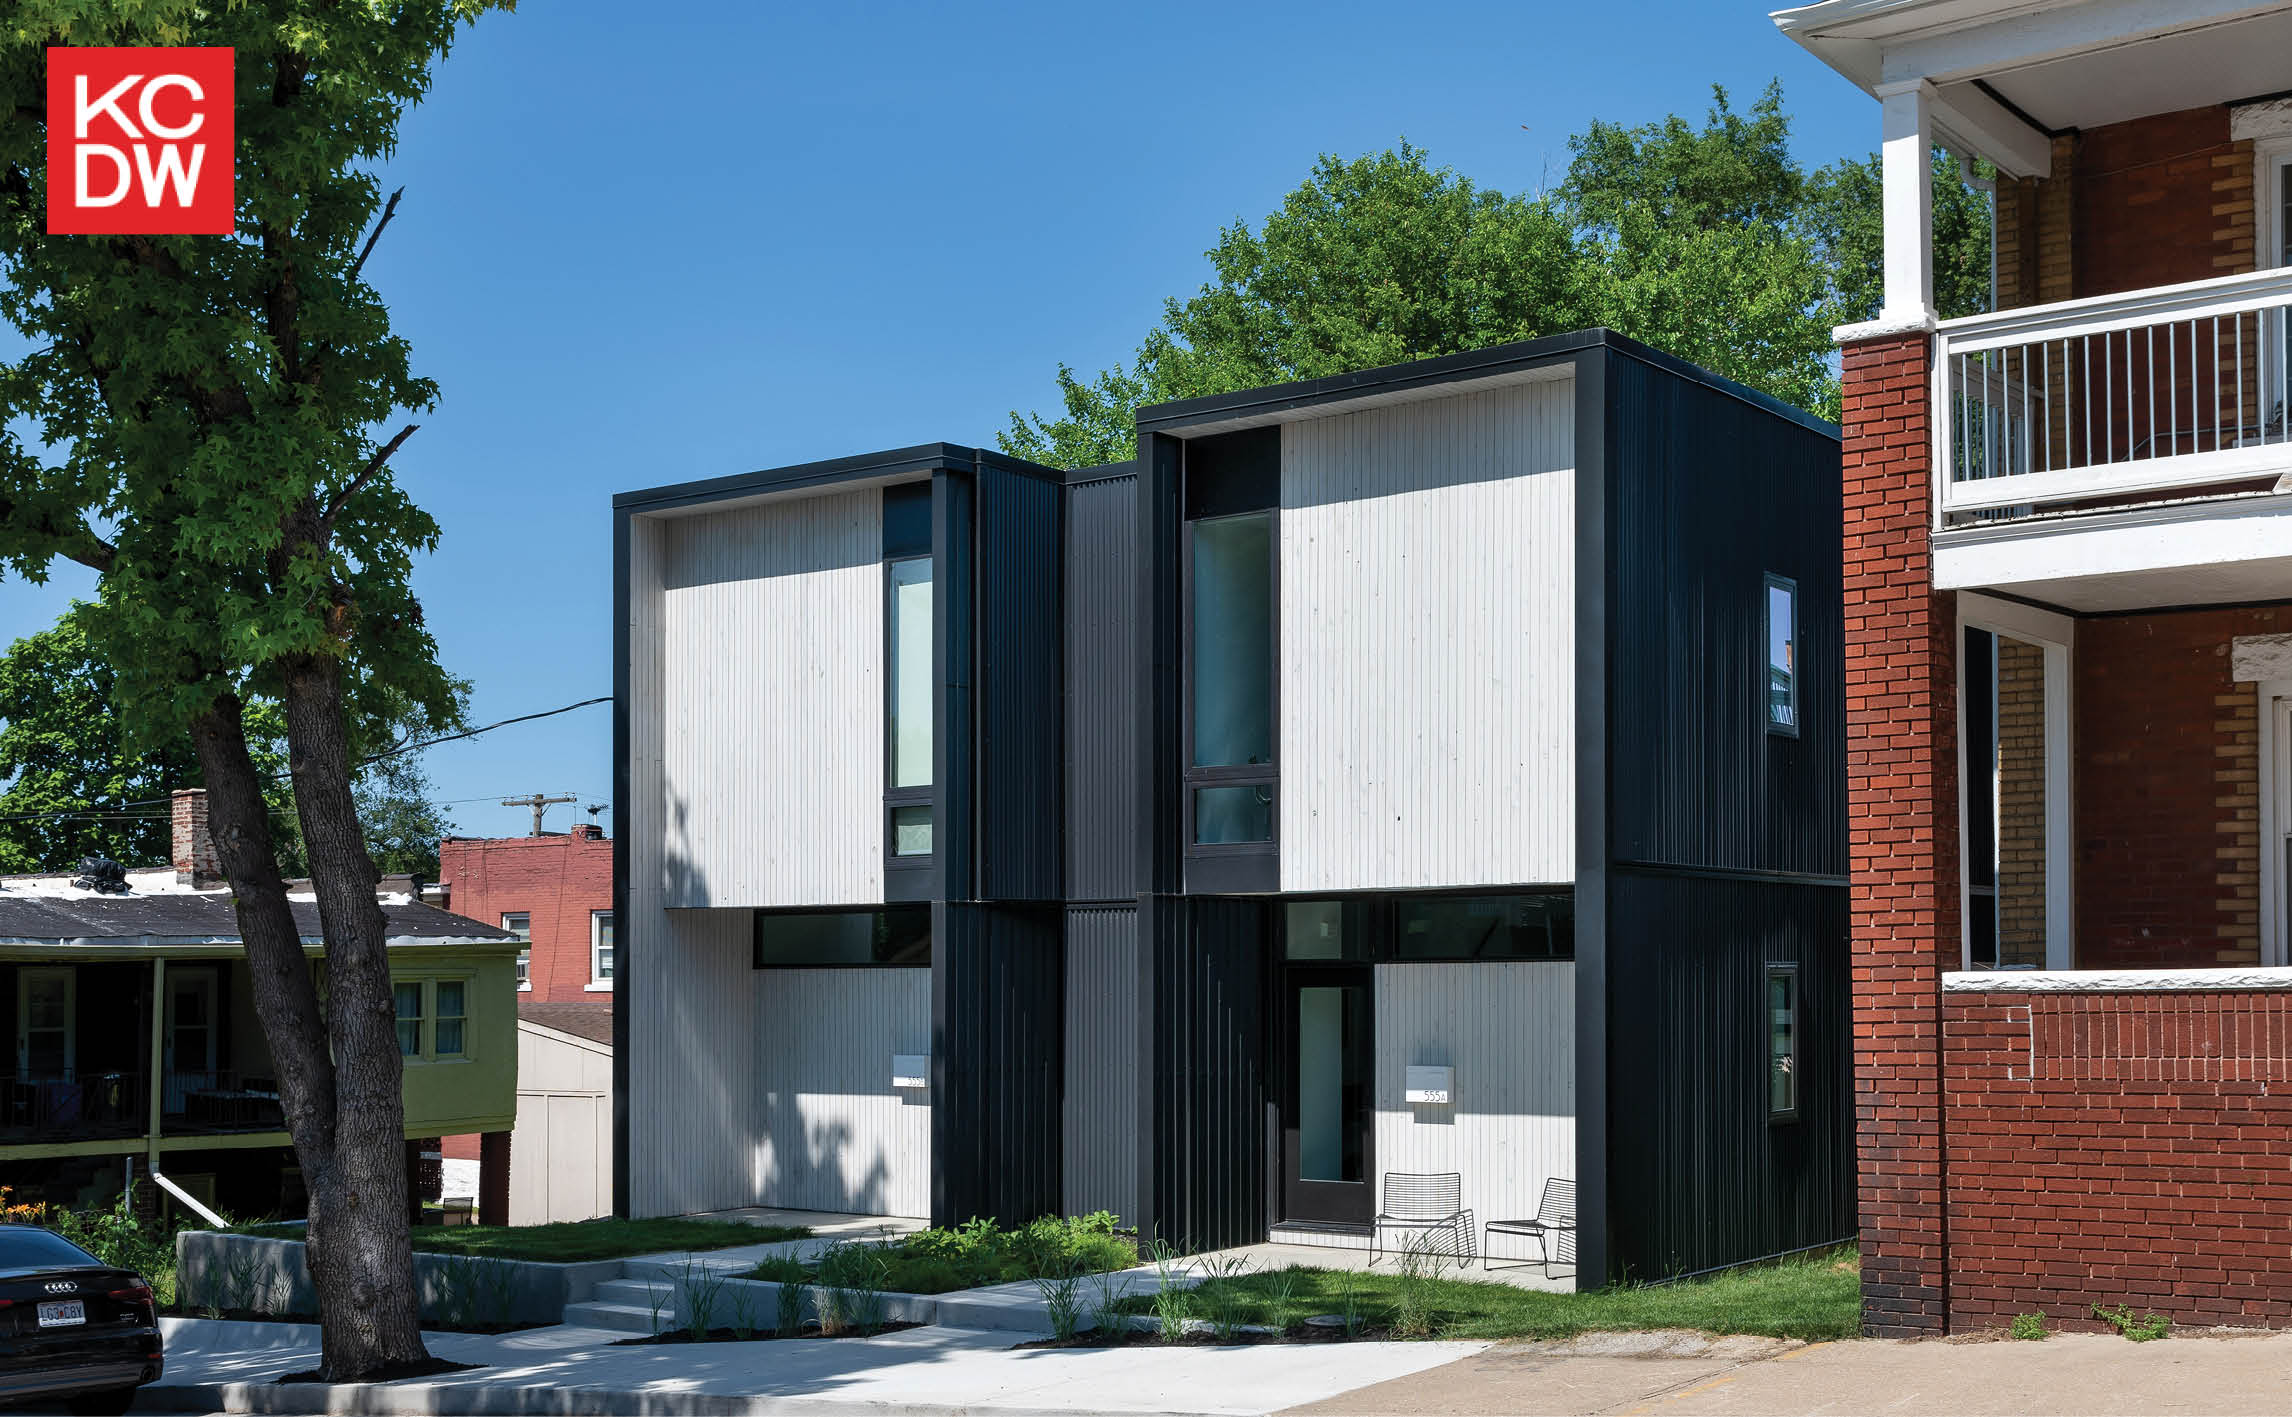 KC Design Week: Relearning the Lost Art of Small-Scale Development